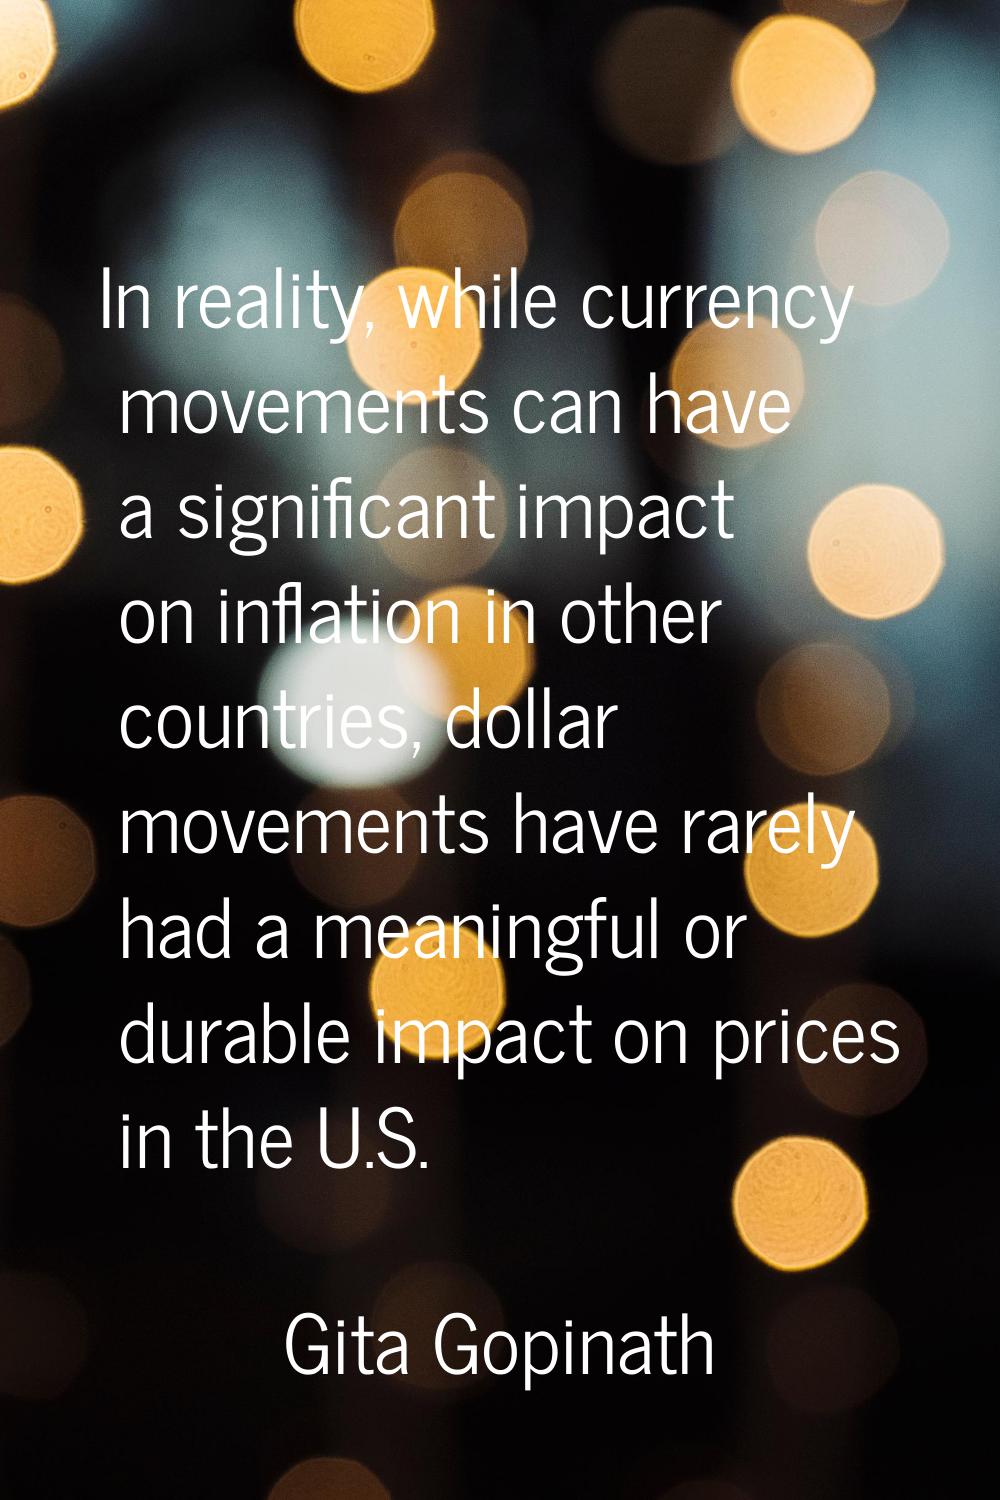 In reality, while currency movements can have a significant impact on inflation in other countries,